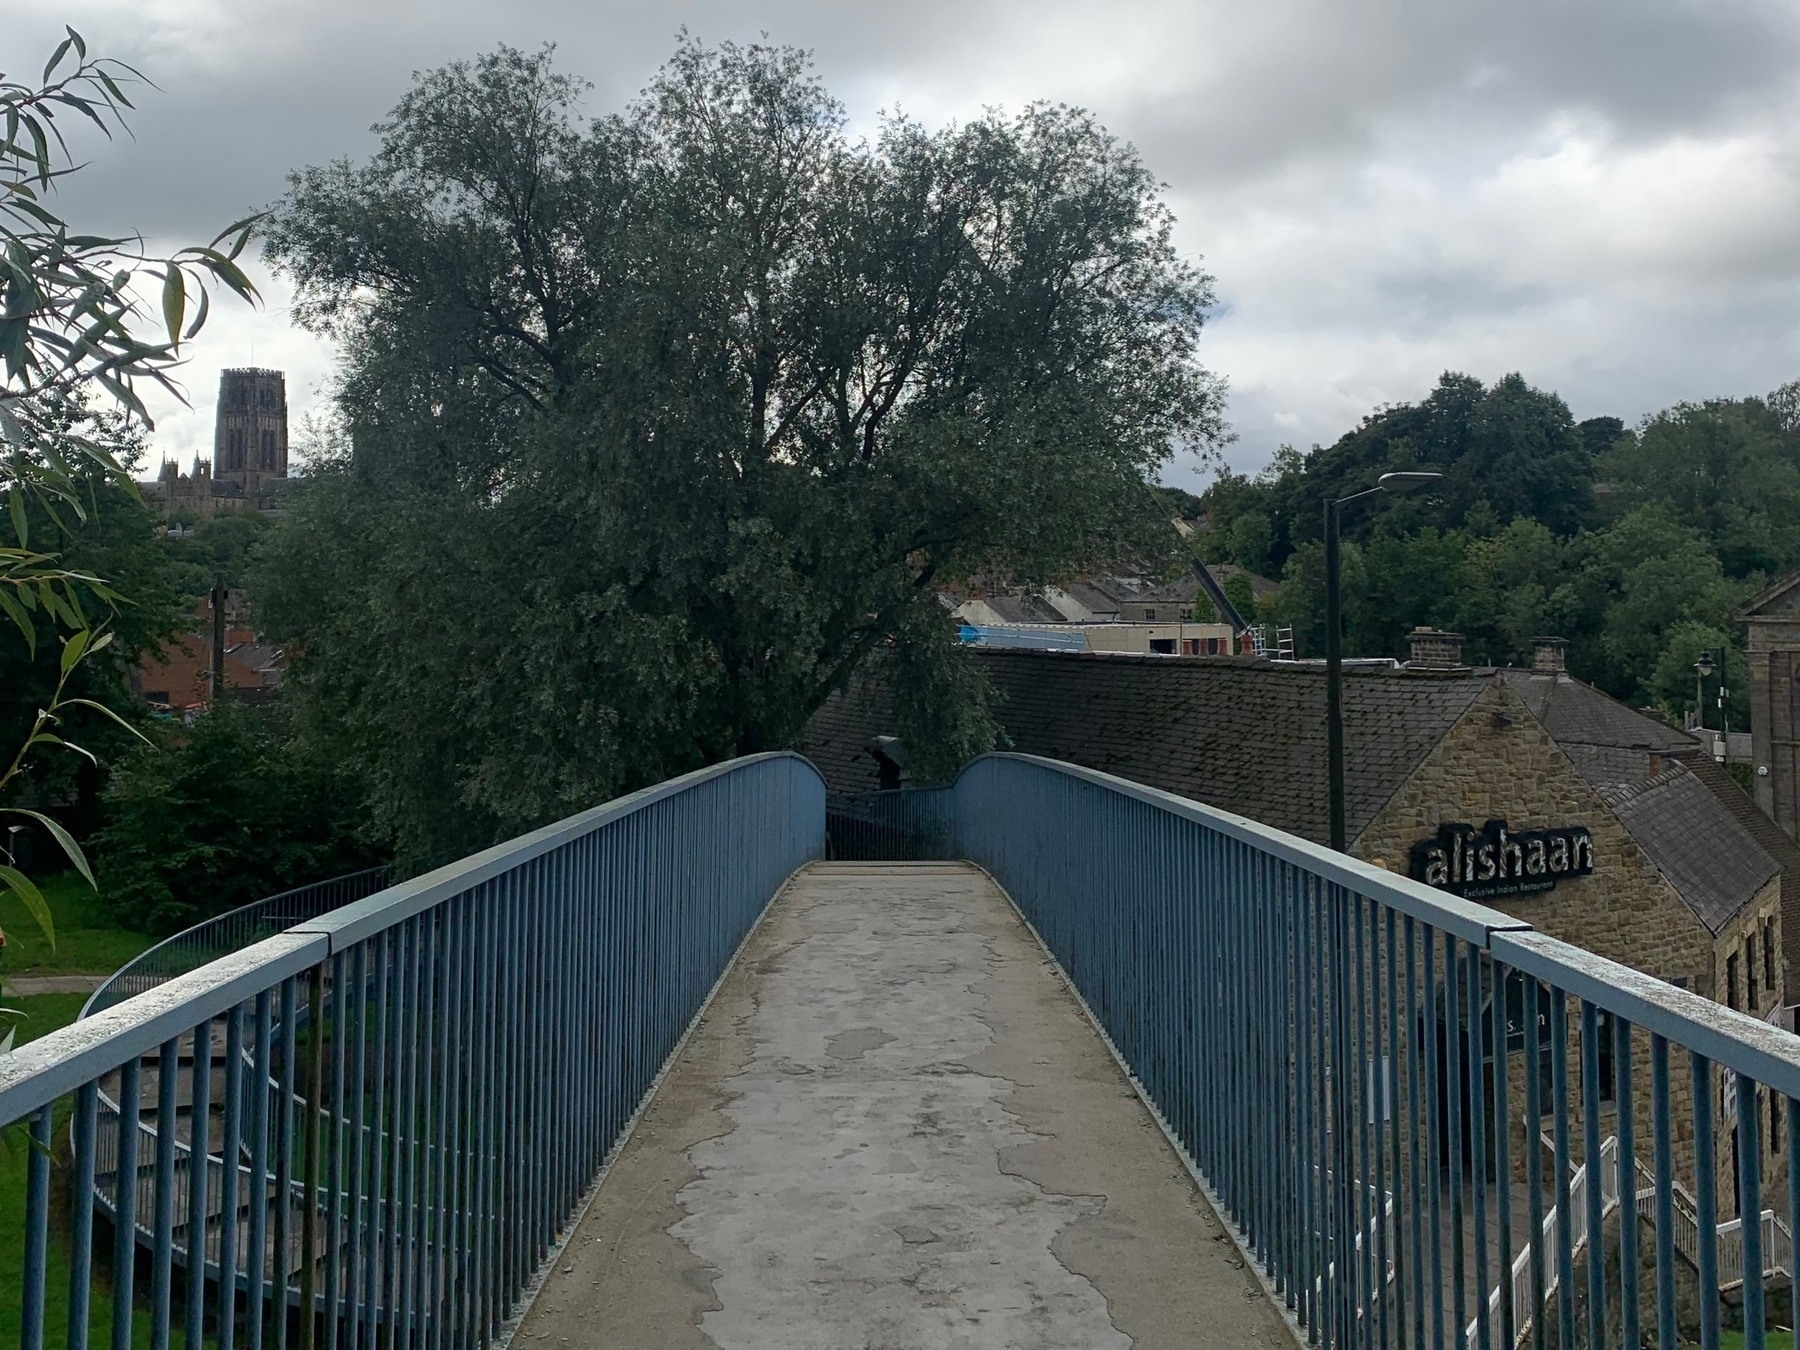 The path of a footbridge over a road.